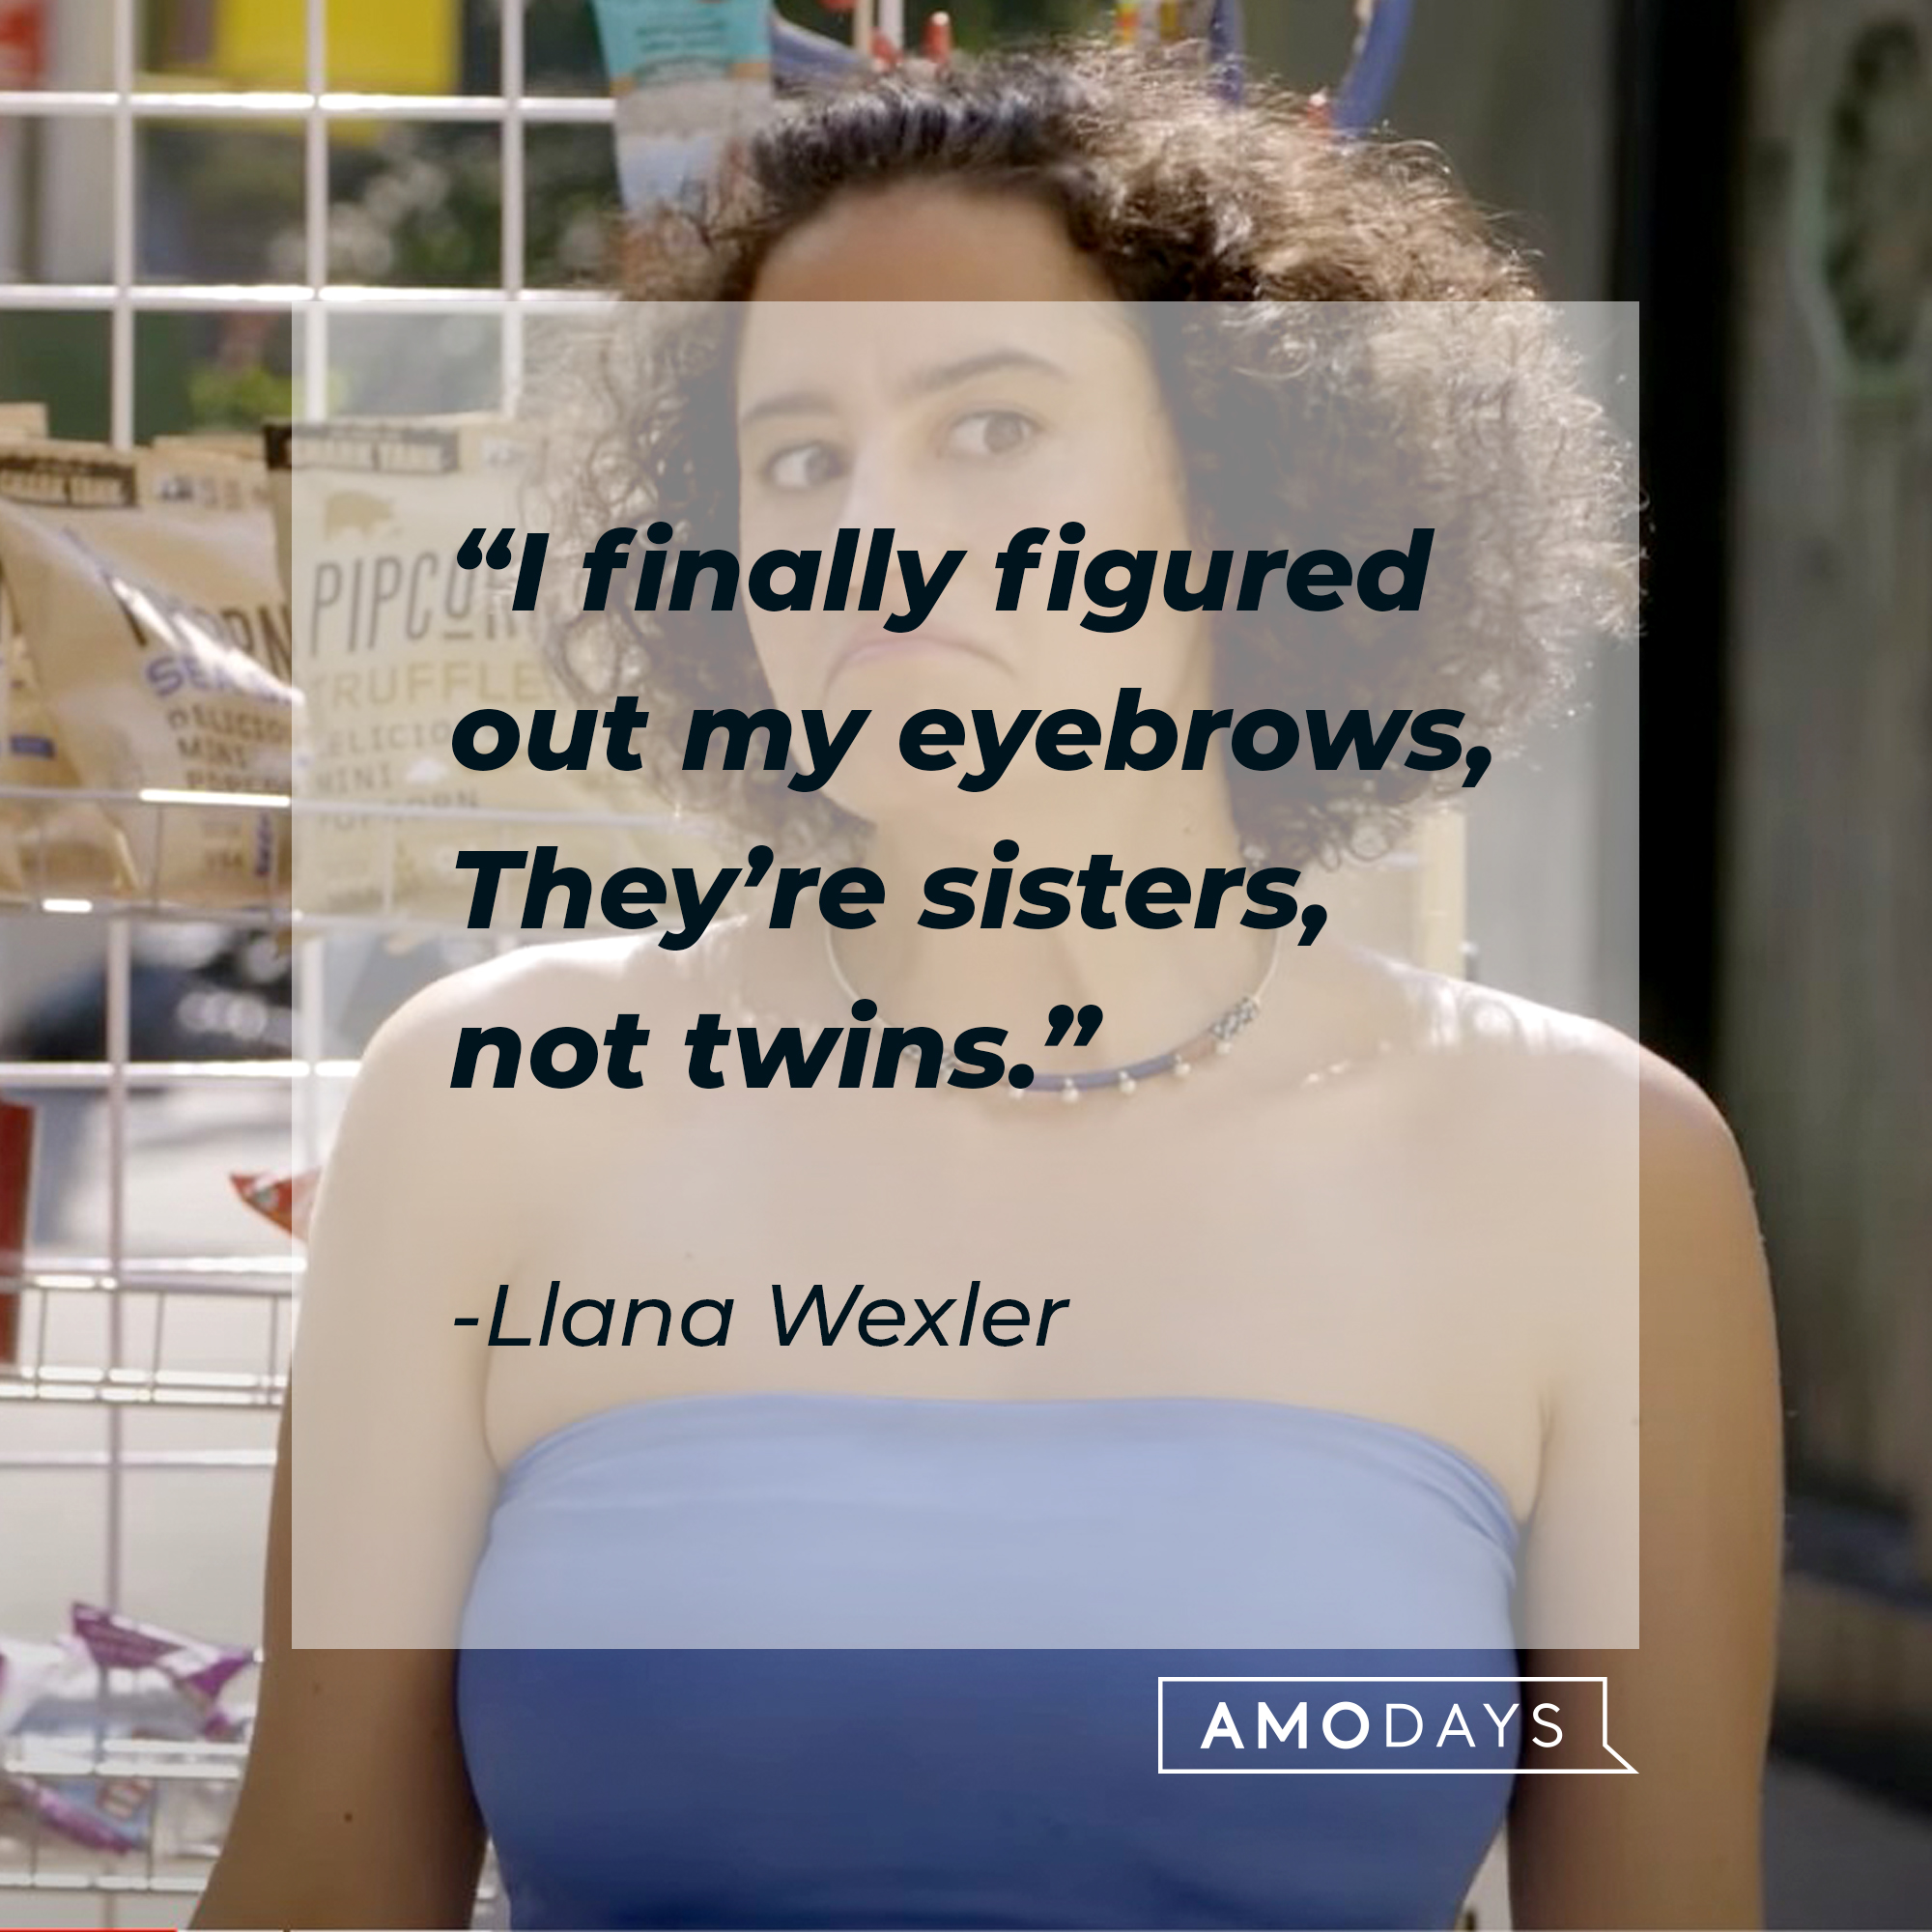 An image of Llana Wexler with her quote: "I finally figured out my eyebrows, They’re sisters, not twins.” | Source: youtube.com/ComedyCentral